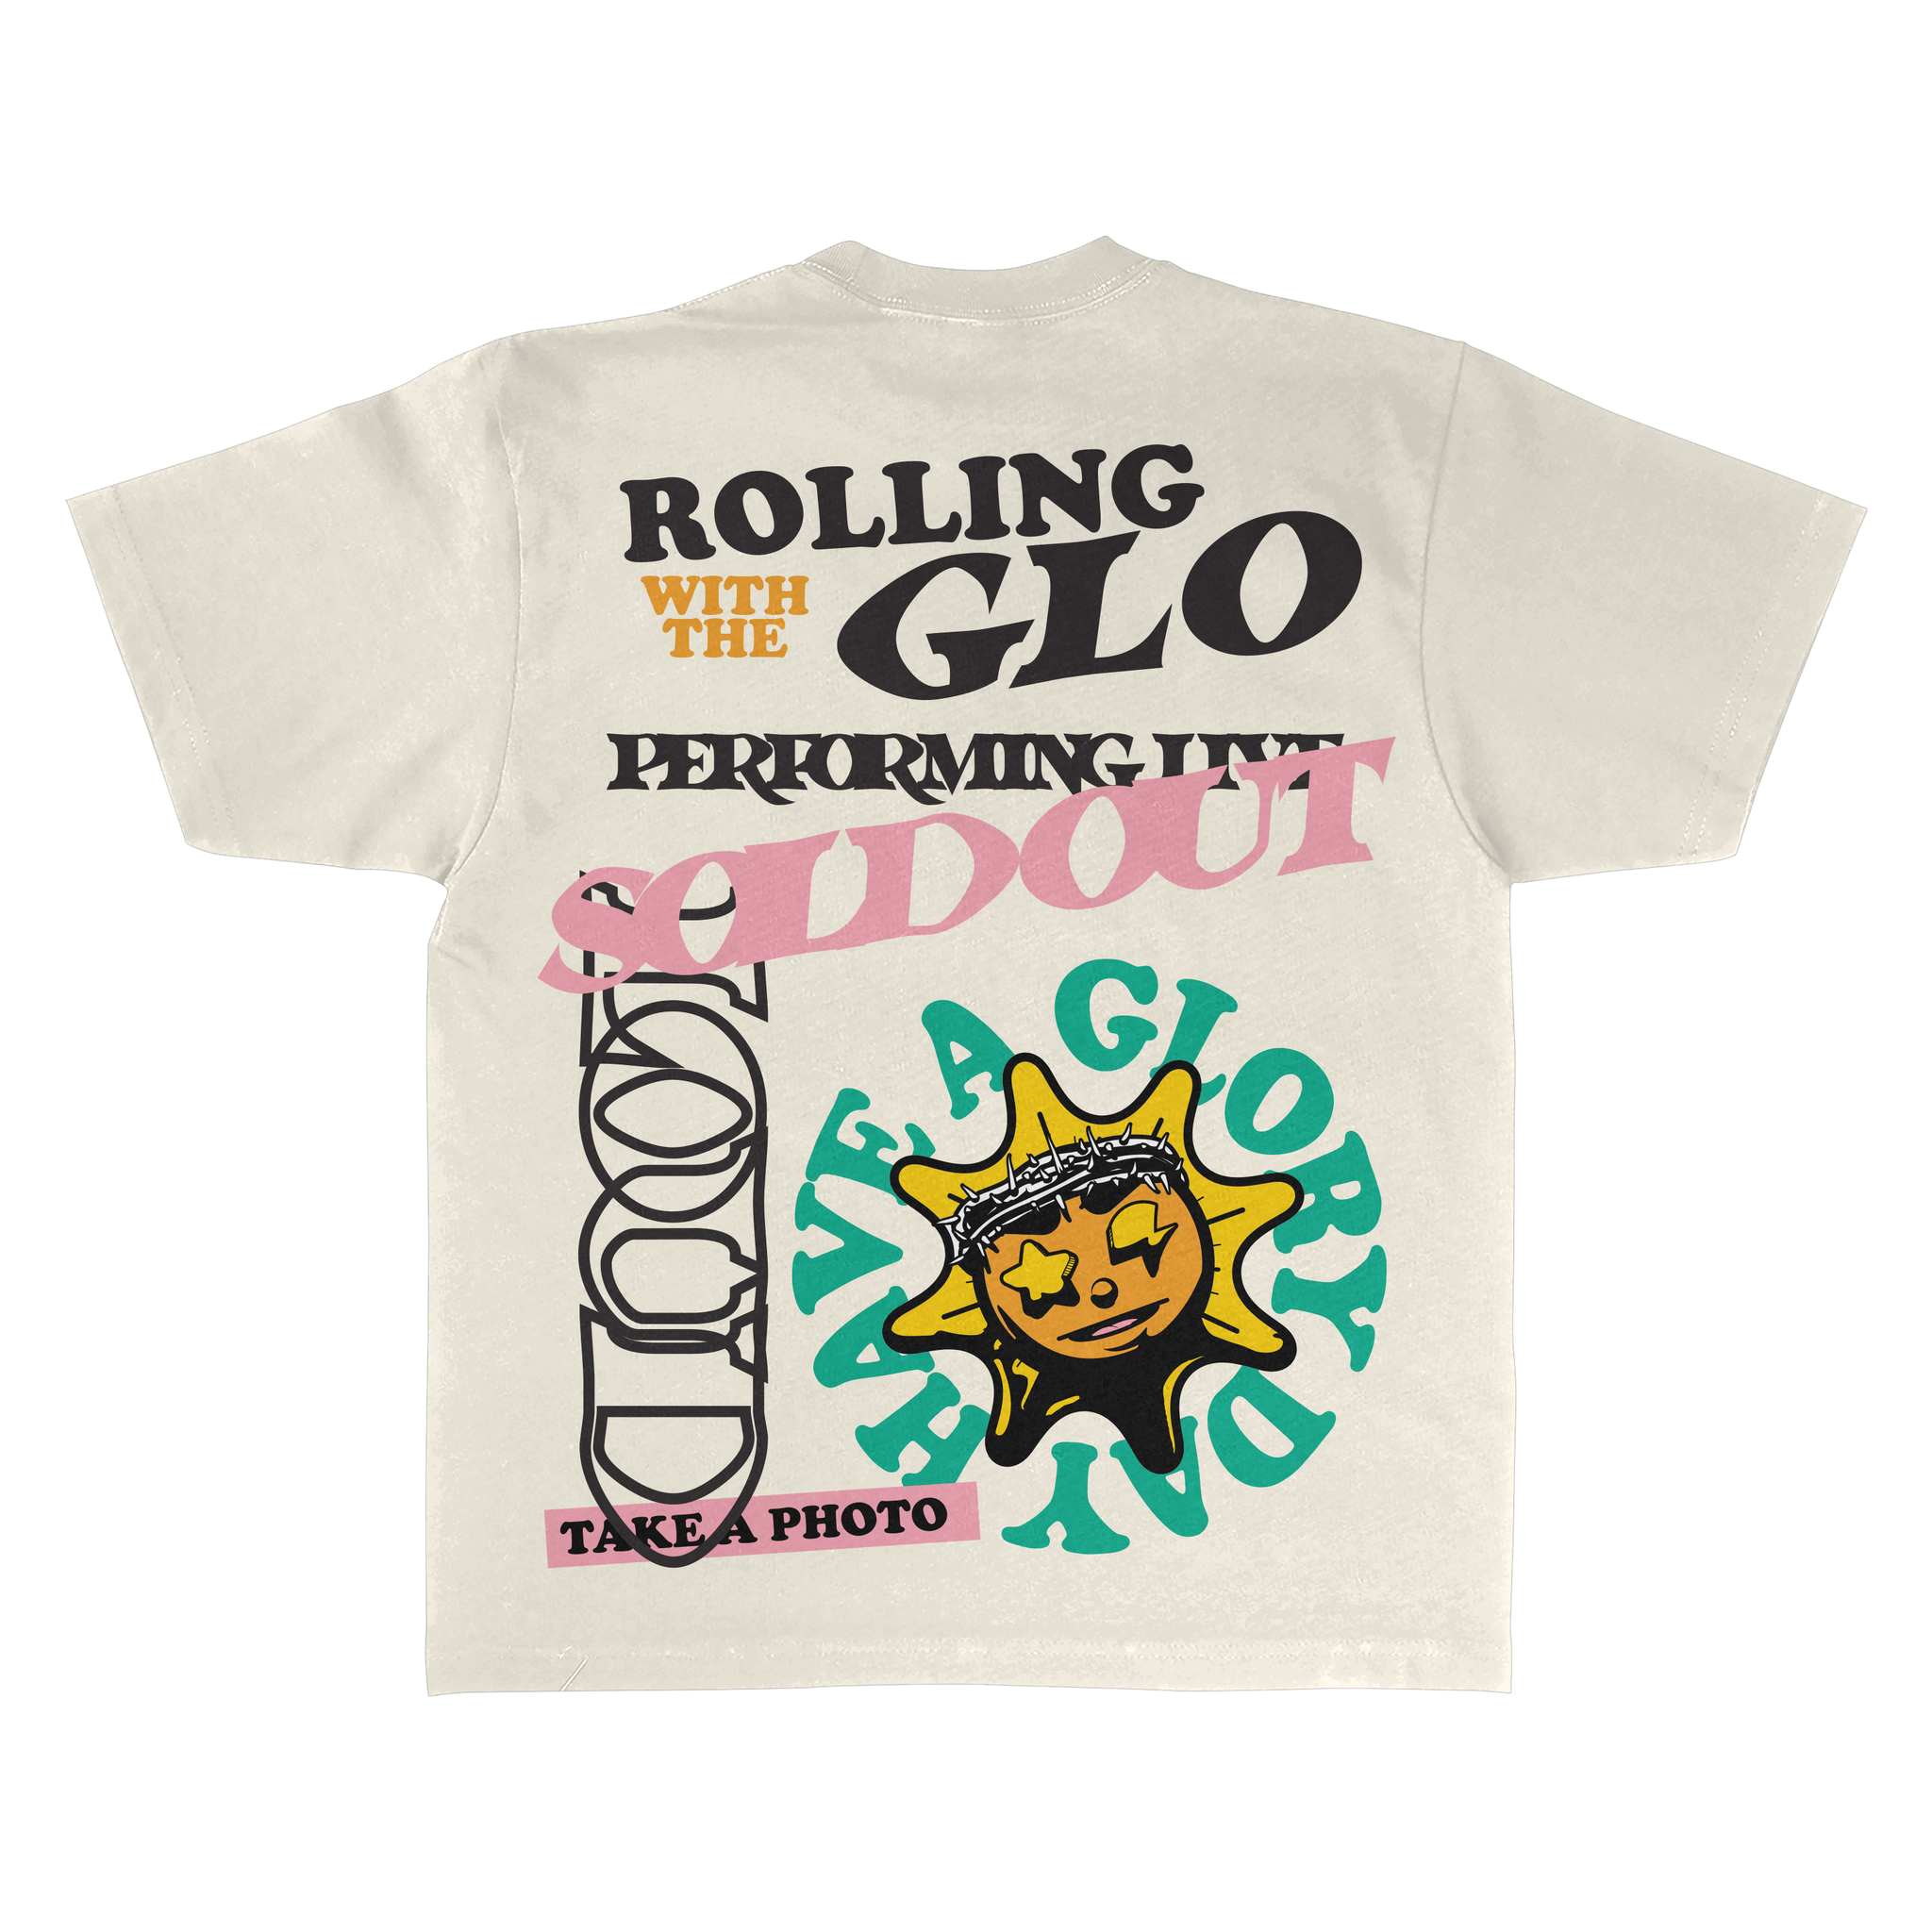 Glo Gang x Rolling Loud Sold Out Tee